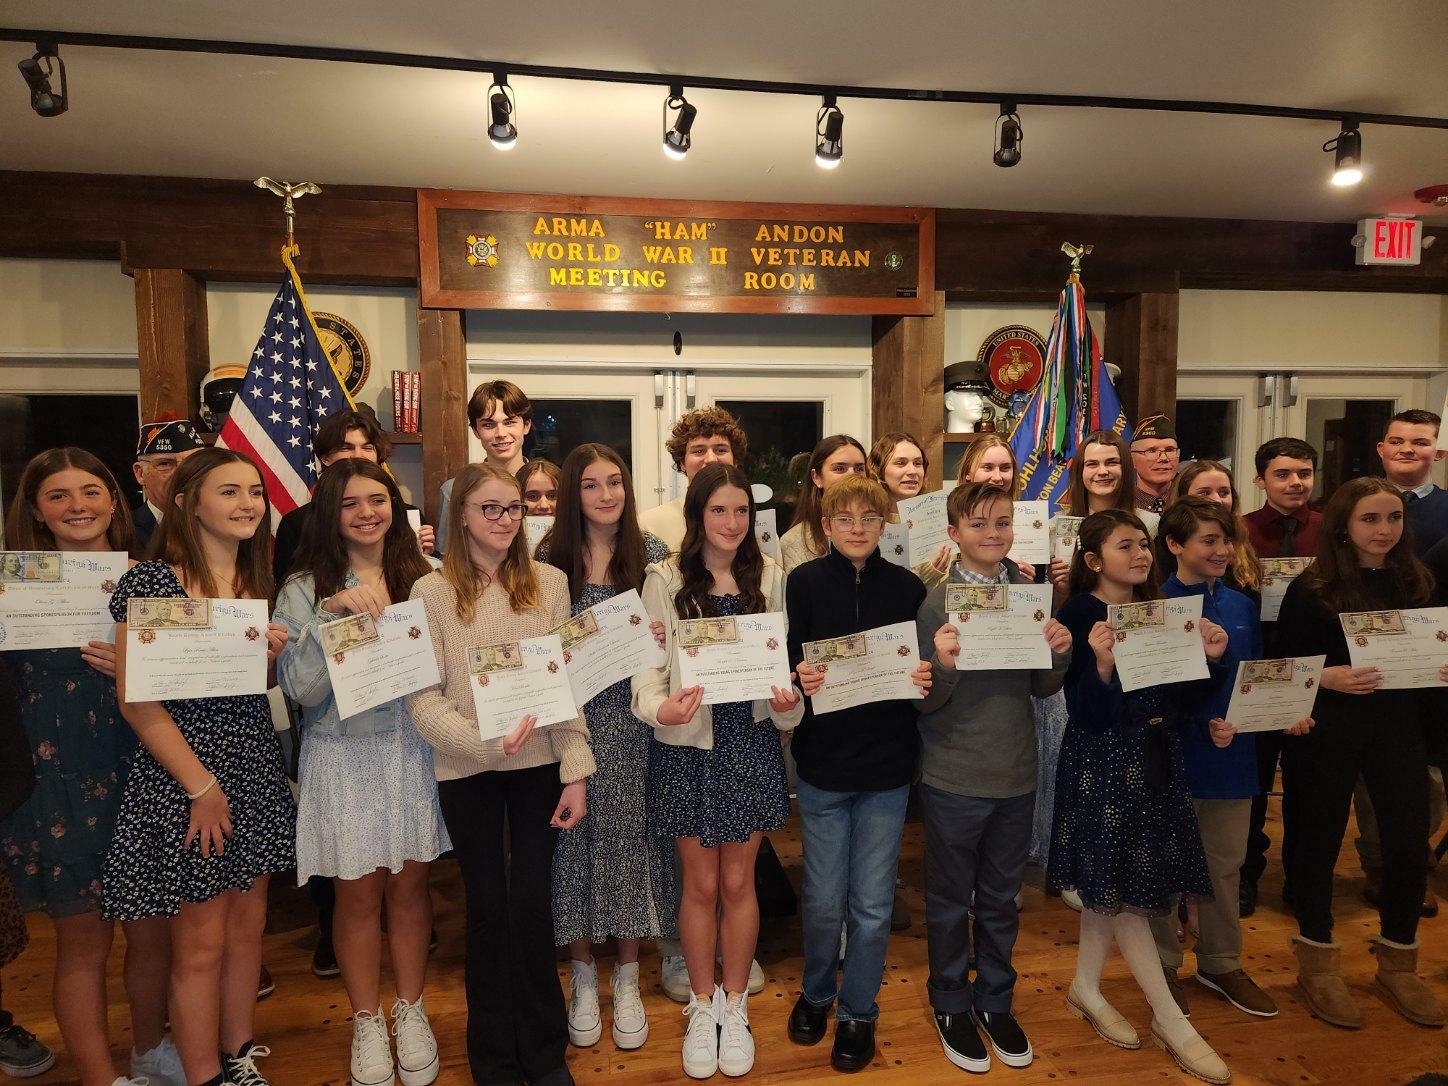 VFW Post 5350 in Westhampton Beach held its Voice of Democracy and Patriots Pen awards on January 26.  Students from Hampton Bays, East Quogue, Raynor Country Day School and Remsenburg-Speonk were recognized for their achievements in this essay and oratorical competition.  Also at the event, the VFW Department of New York Teacher of the Year, Korey Williams a social studies teacher at Westhampton Beach High School and a life member of Post 5350, was recognized for his contributions to the program. COURTESY VFW POST 5350